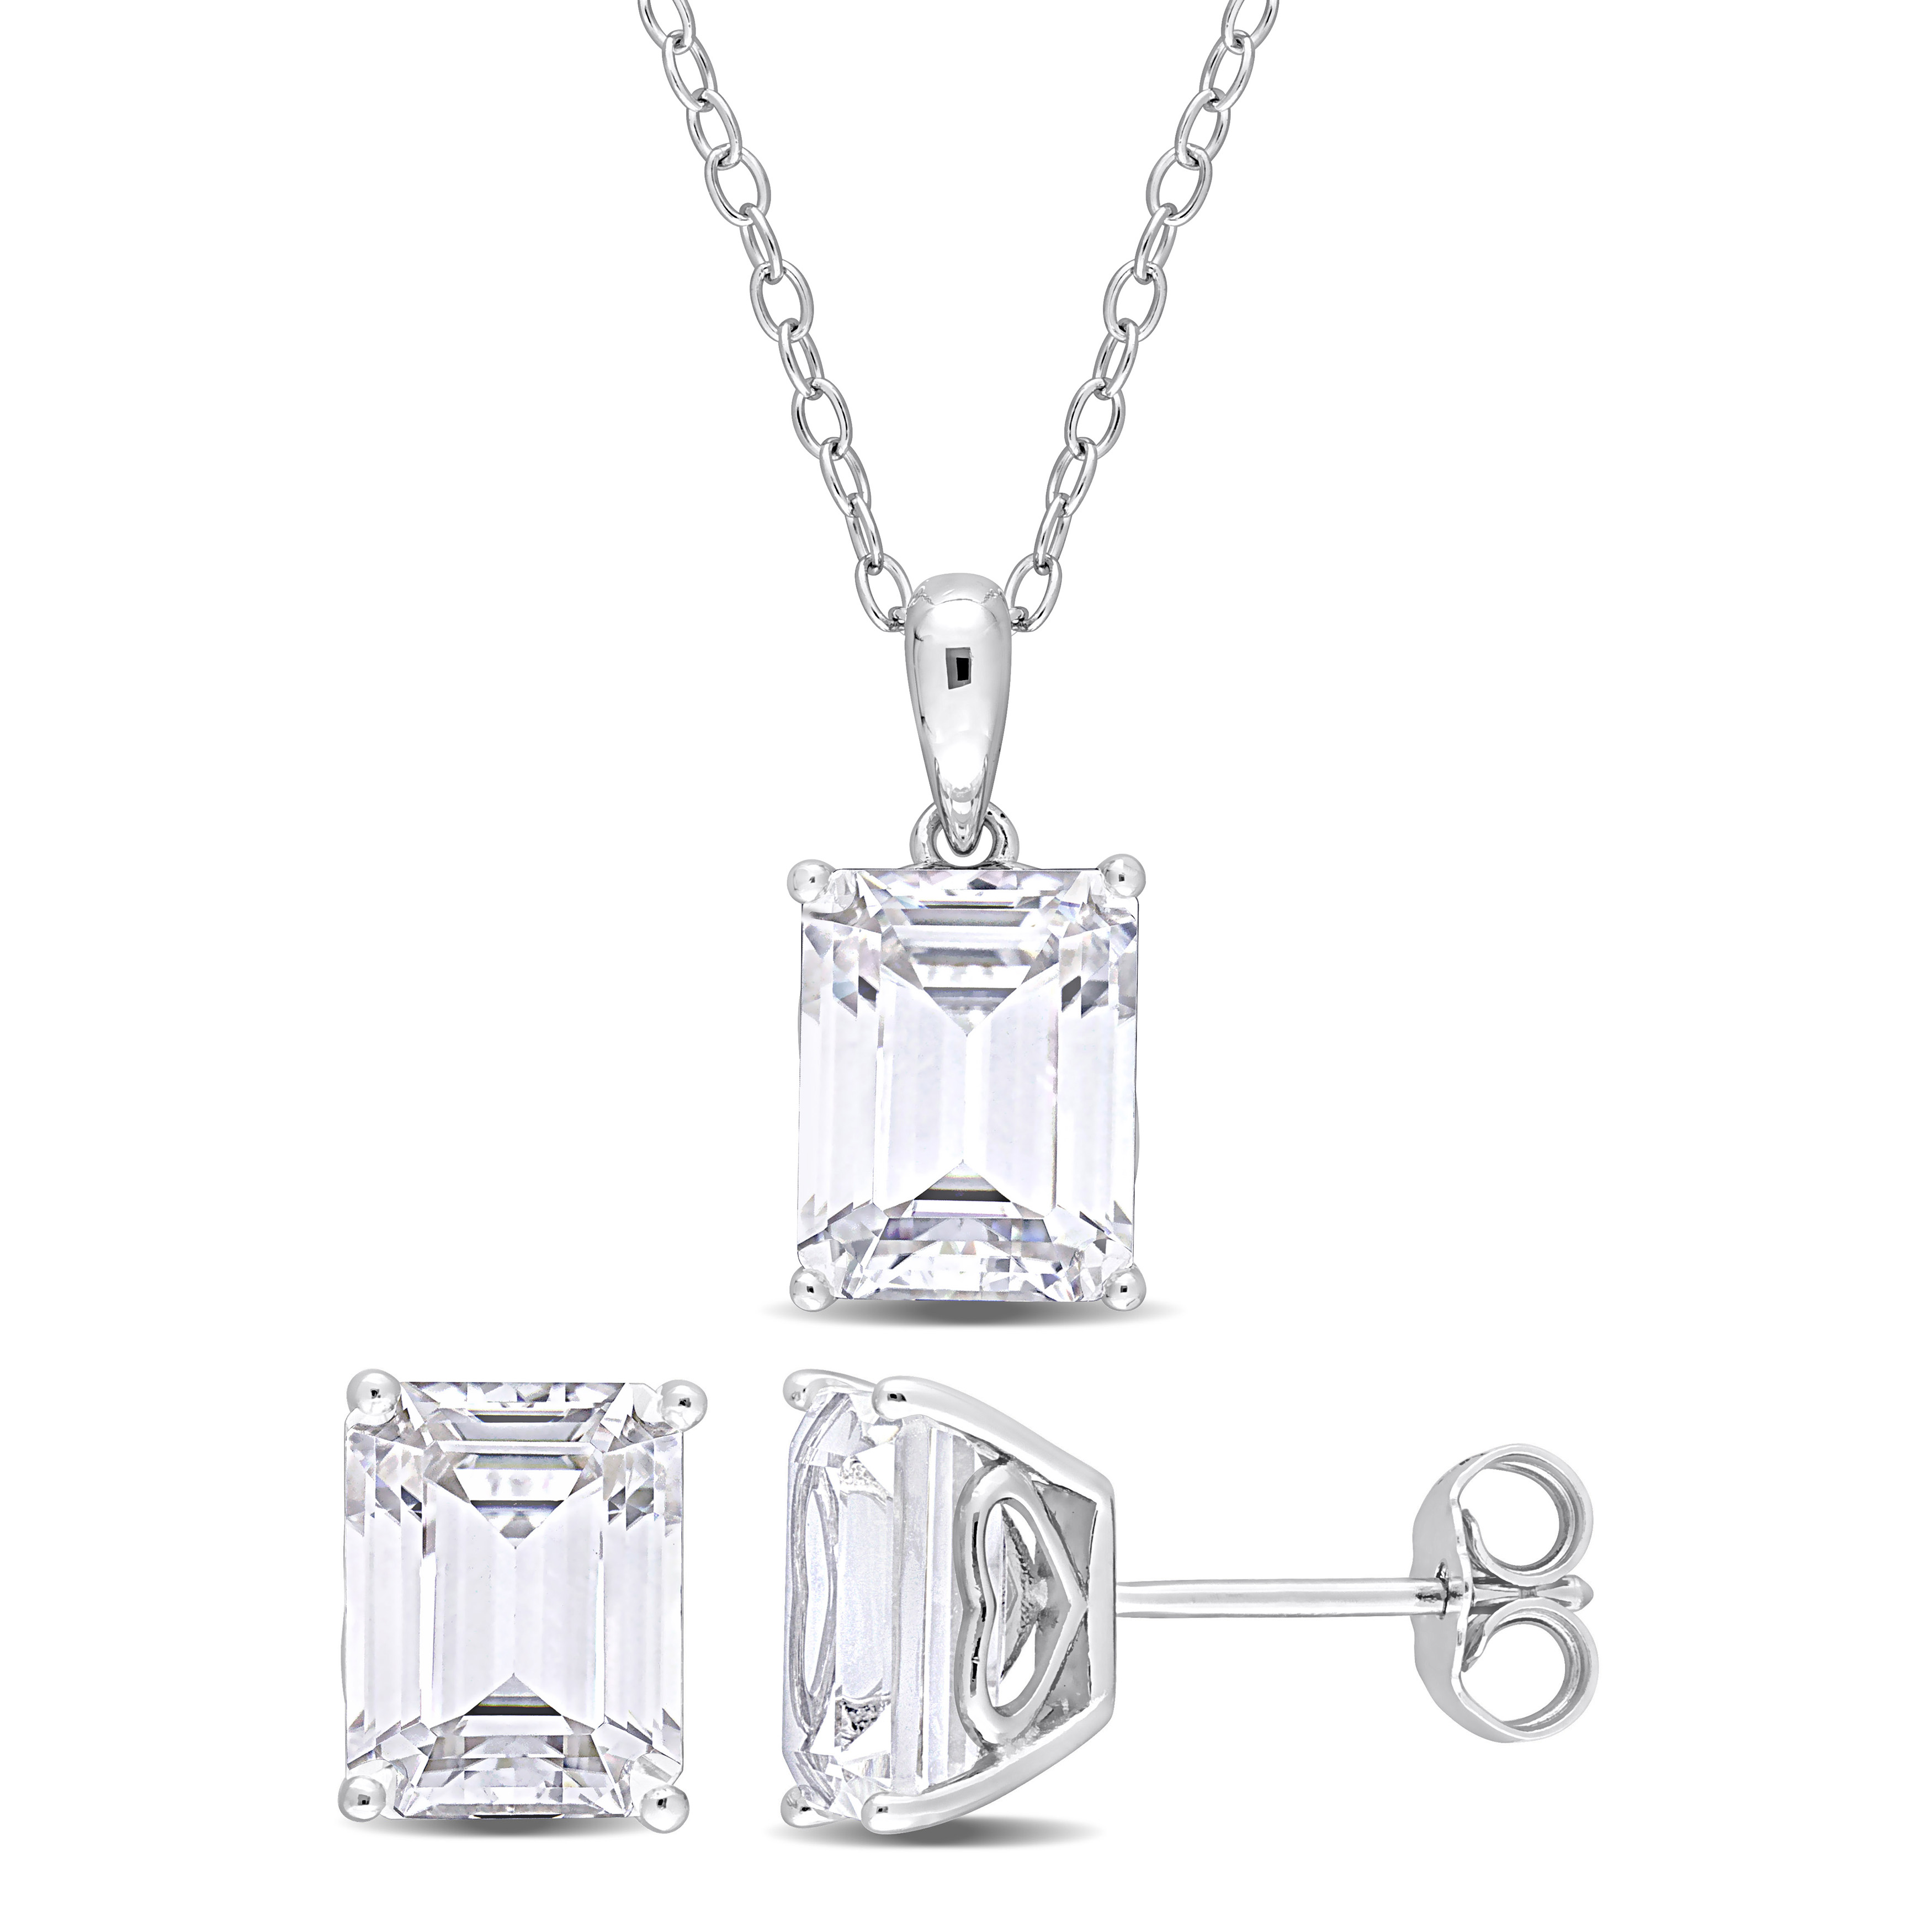 8 4/5 CT TGW Emerald-Cut and Octagon White Topaz 2-Piece Solitaire Pendant with Chain and Stud Earrings Set in Sterling Silver